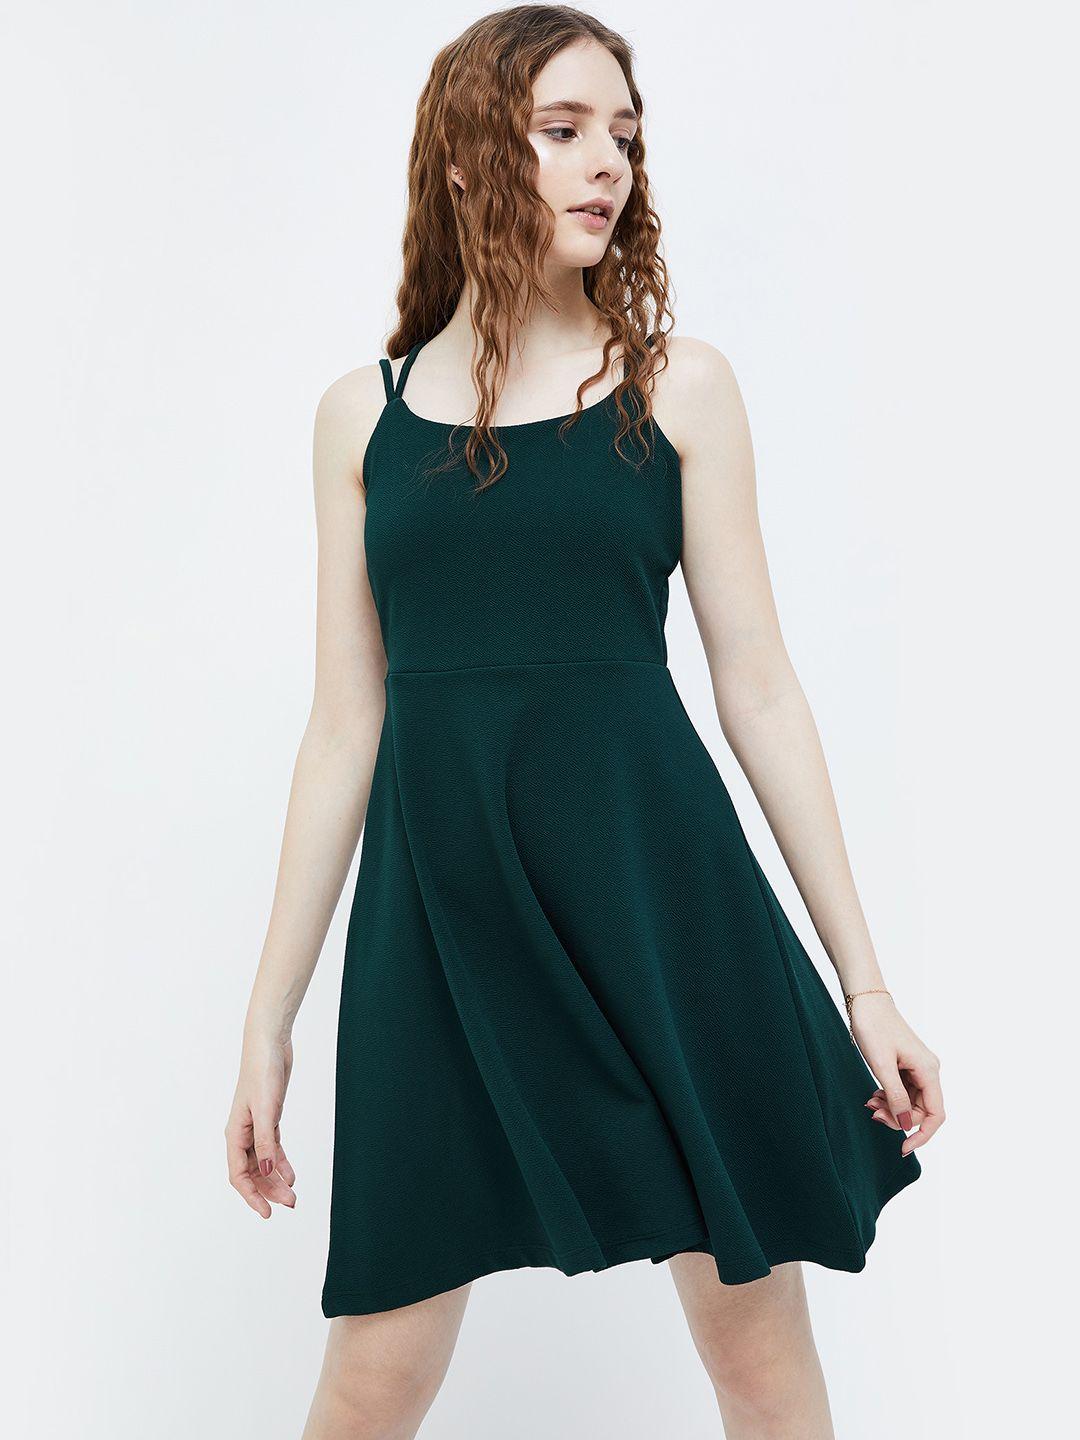 ginger by lifestyle sleeveless fit & flare dress